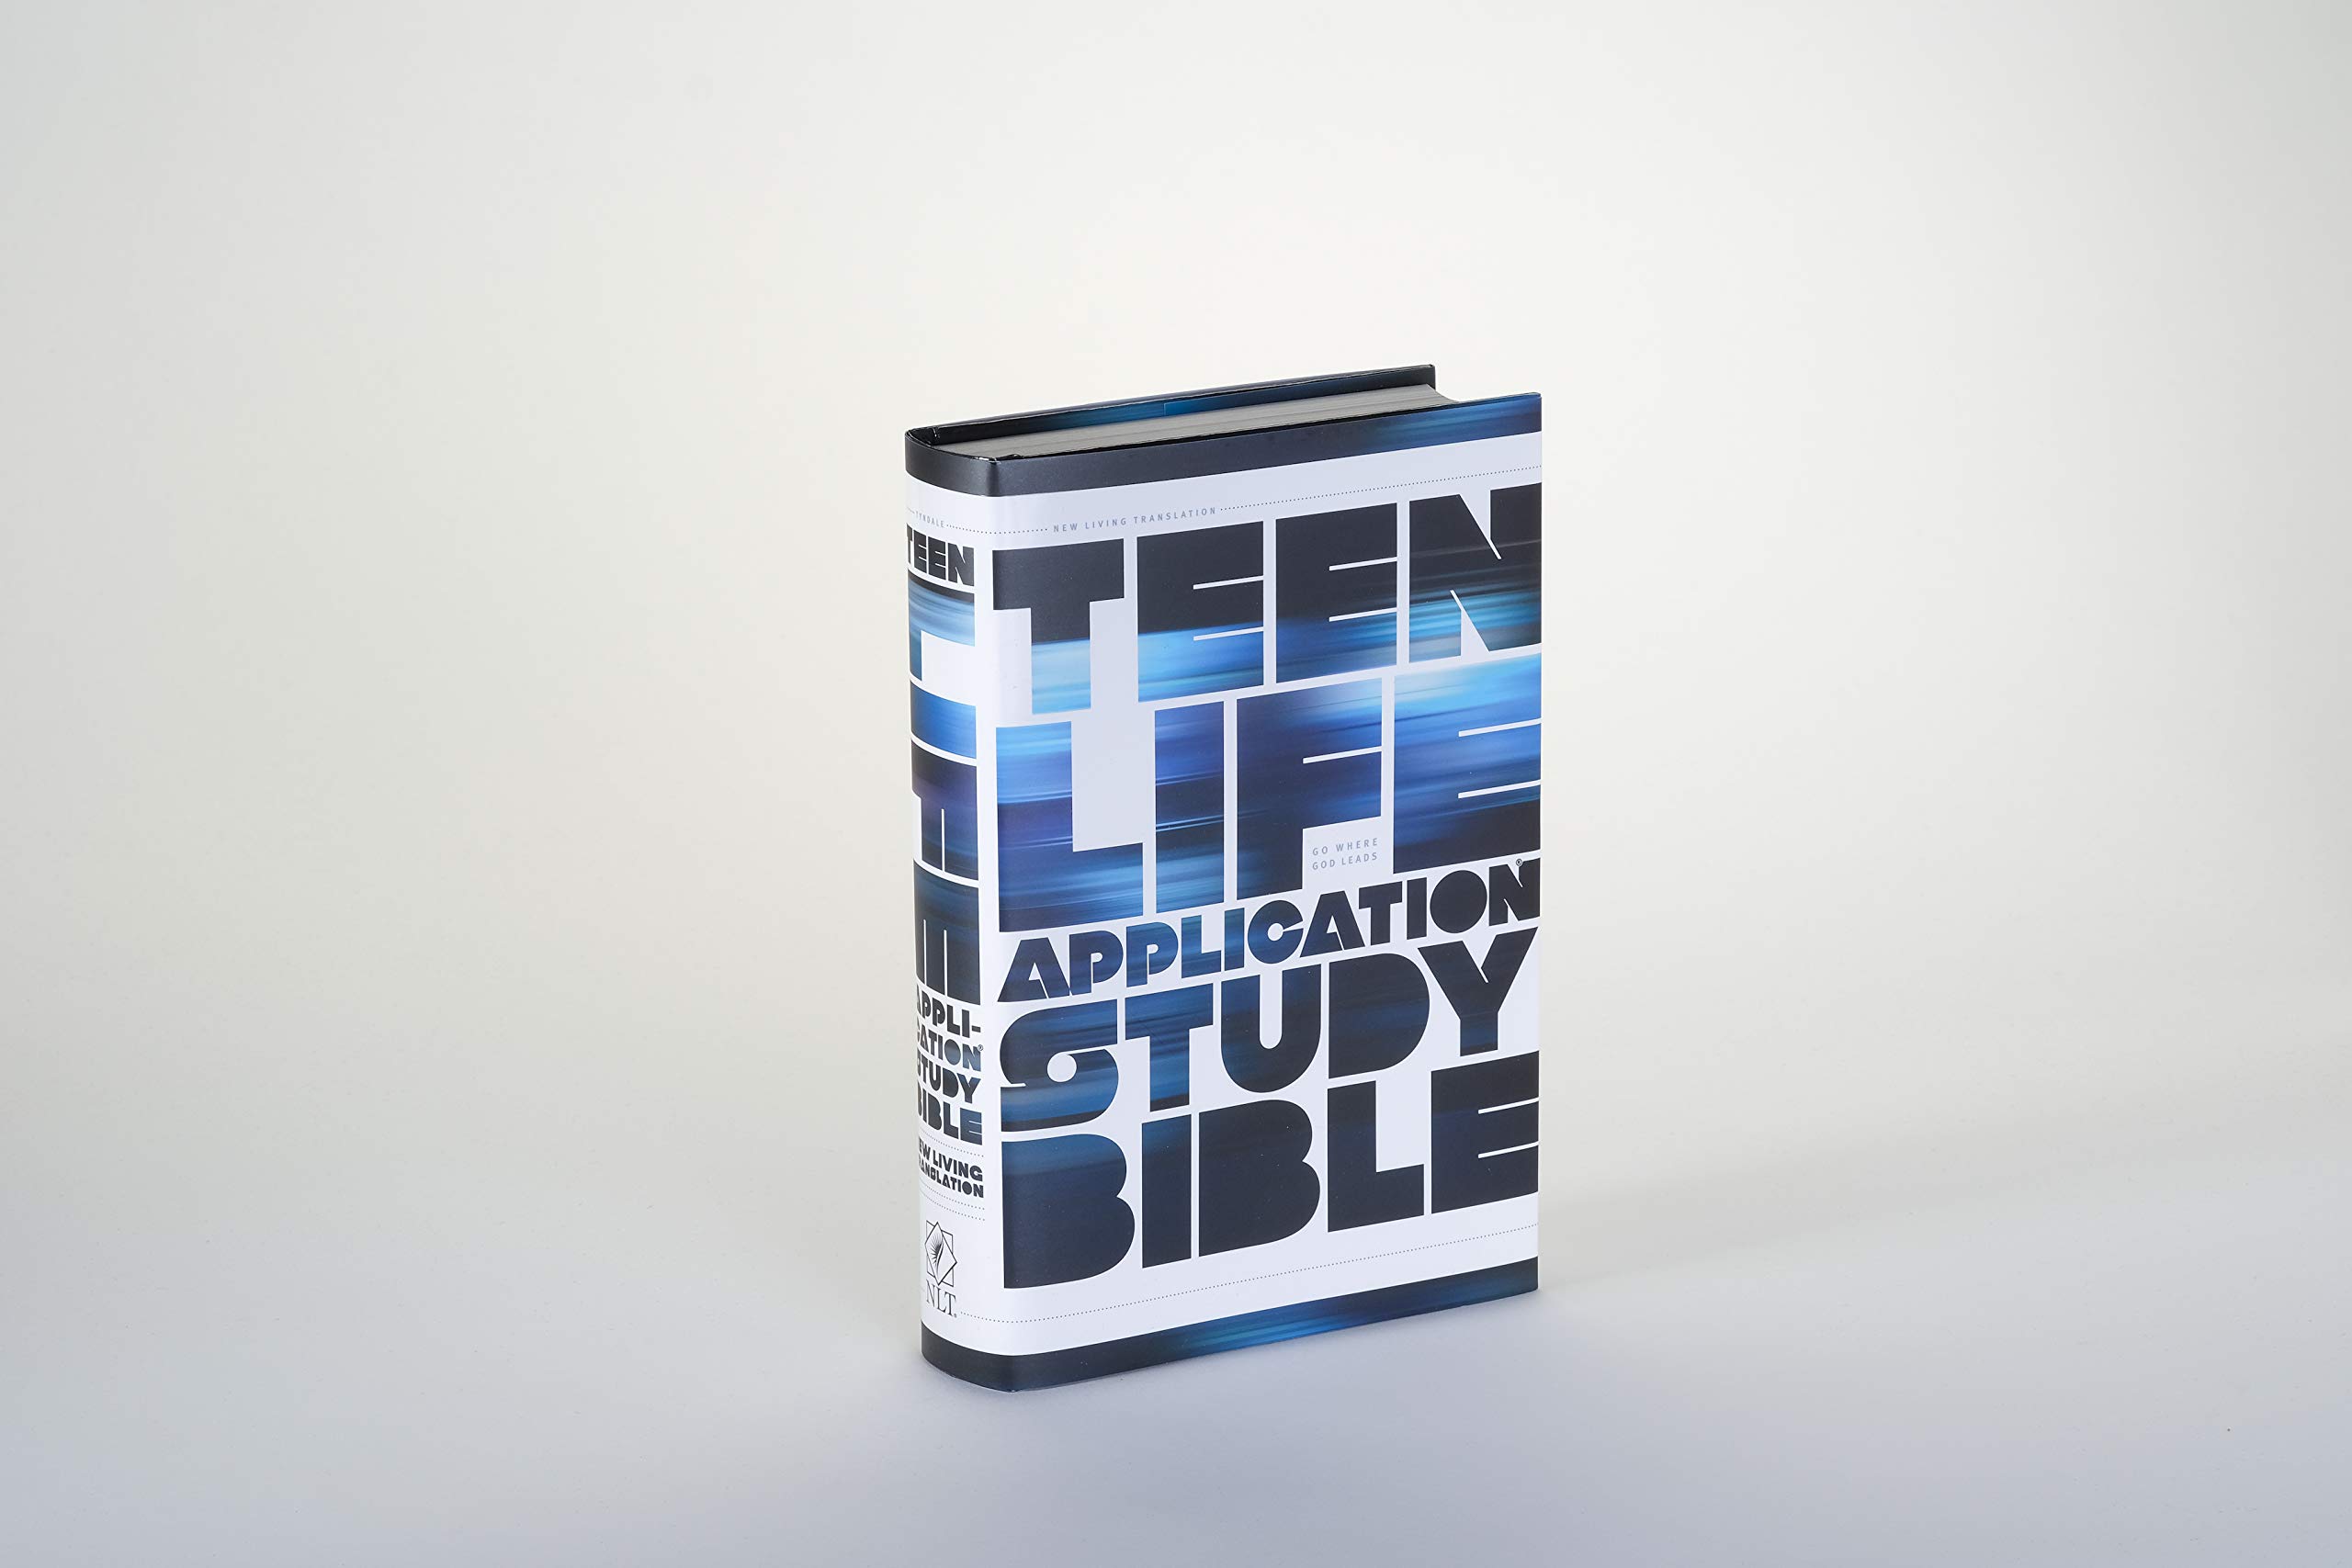 Tyndale NLT Teen Life Application Study Bible (Hardcover), NLT Study Bible with Notes and Features, Full Text New Living Translation